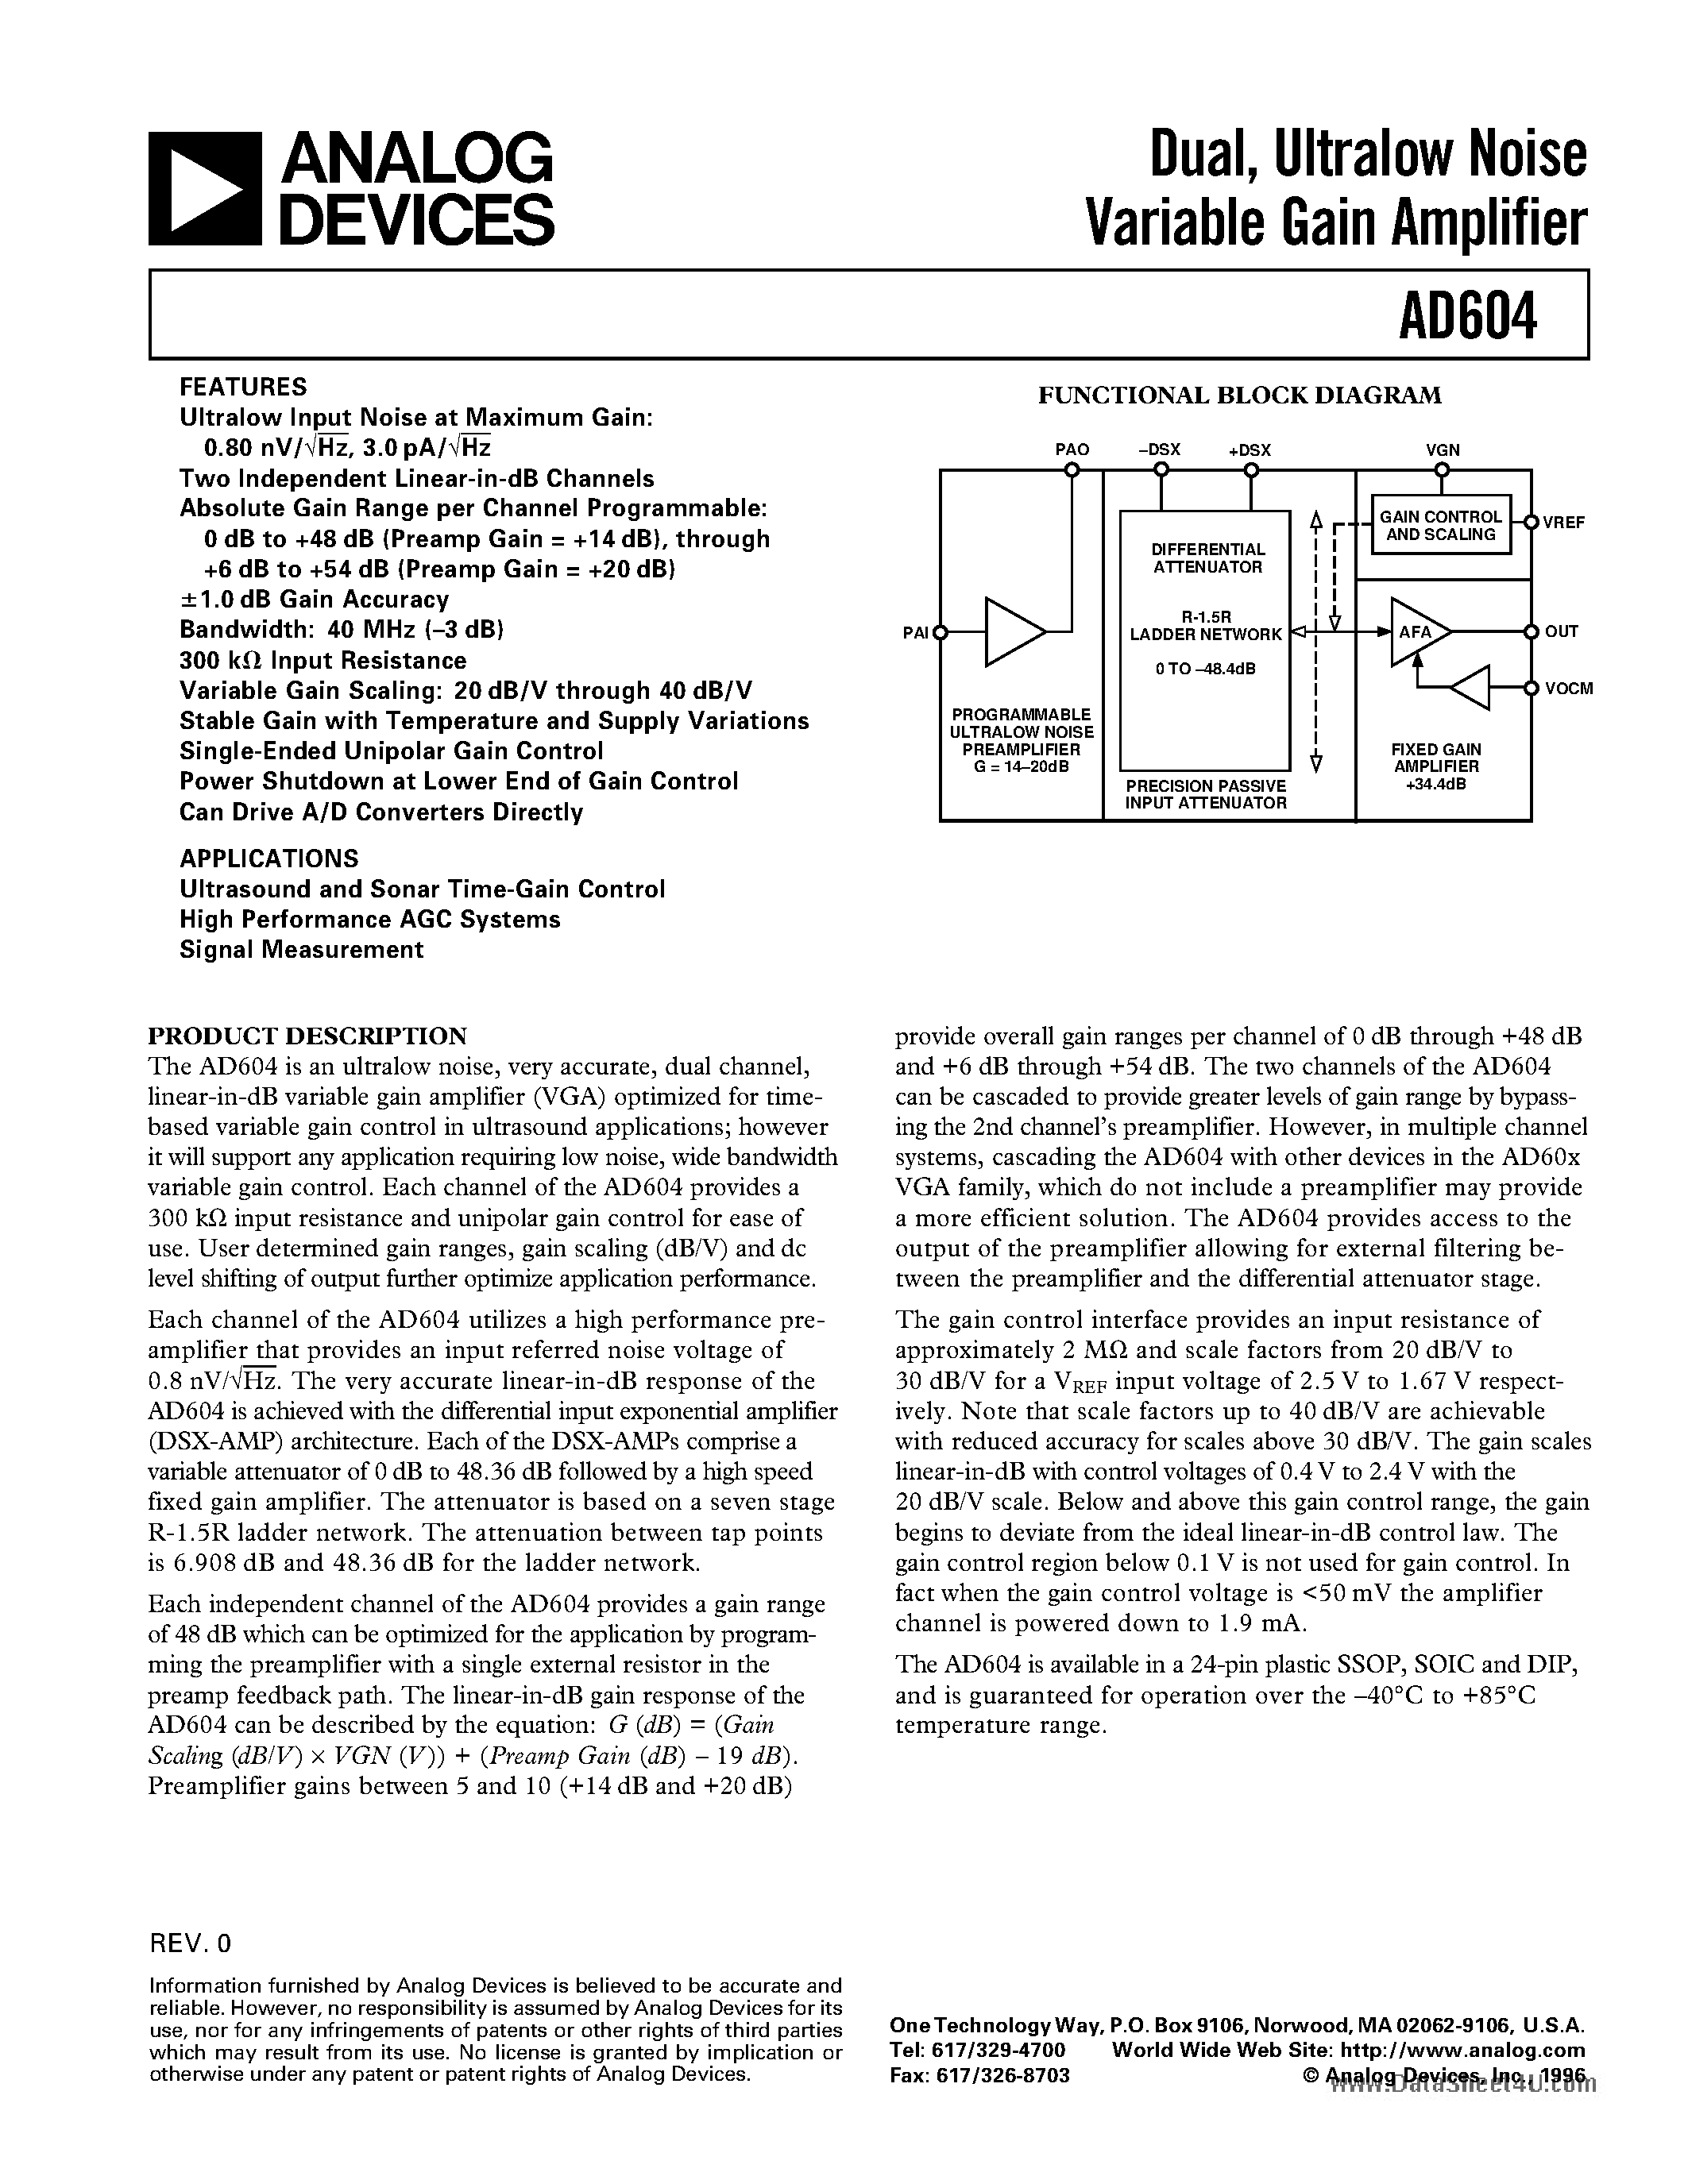 Datasheet AD604 - Dual/ Ultralow Noise Variable Gain Amplifier page 1